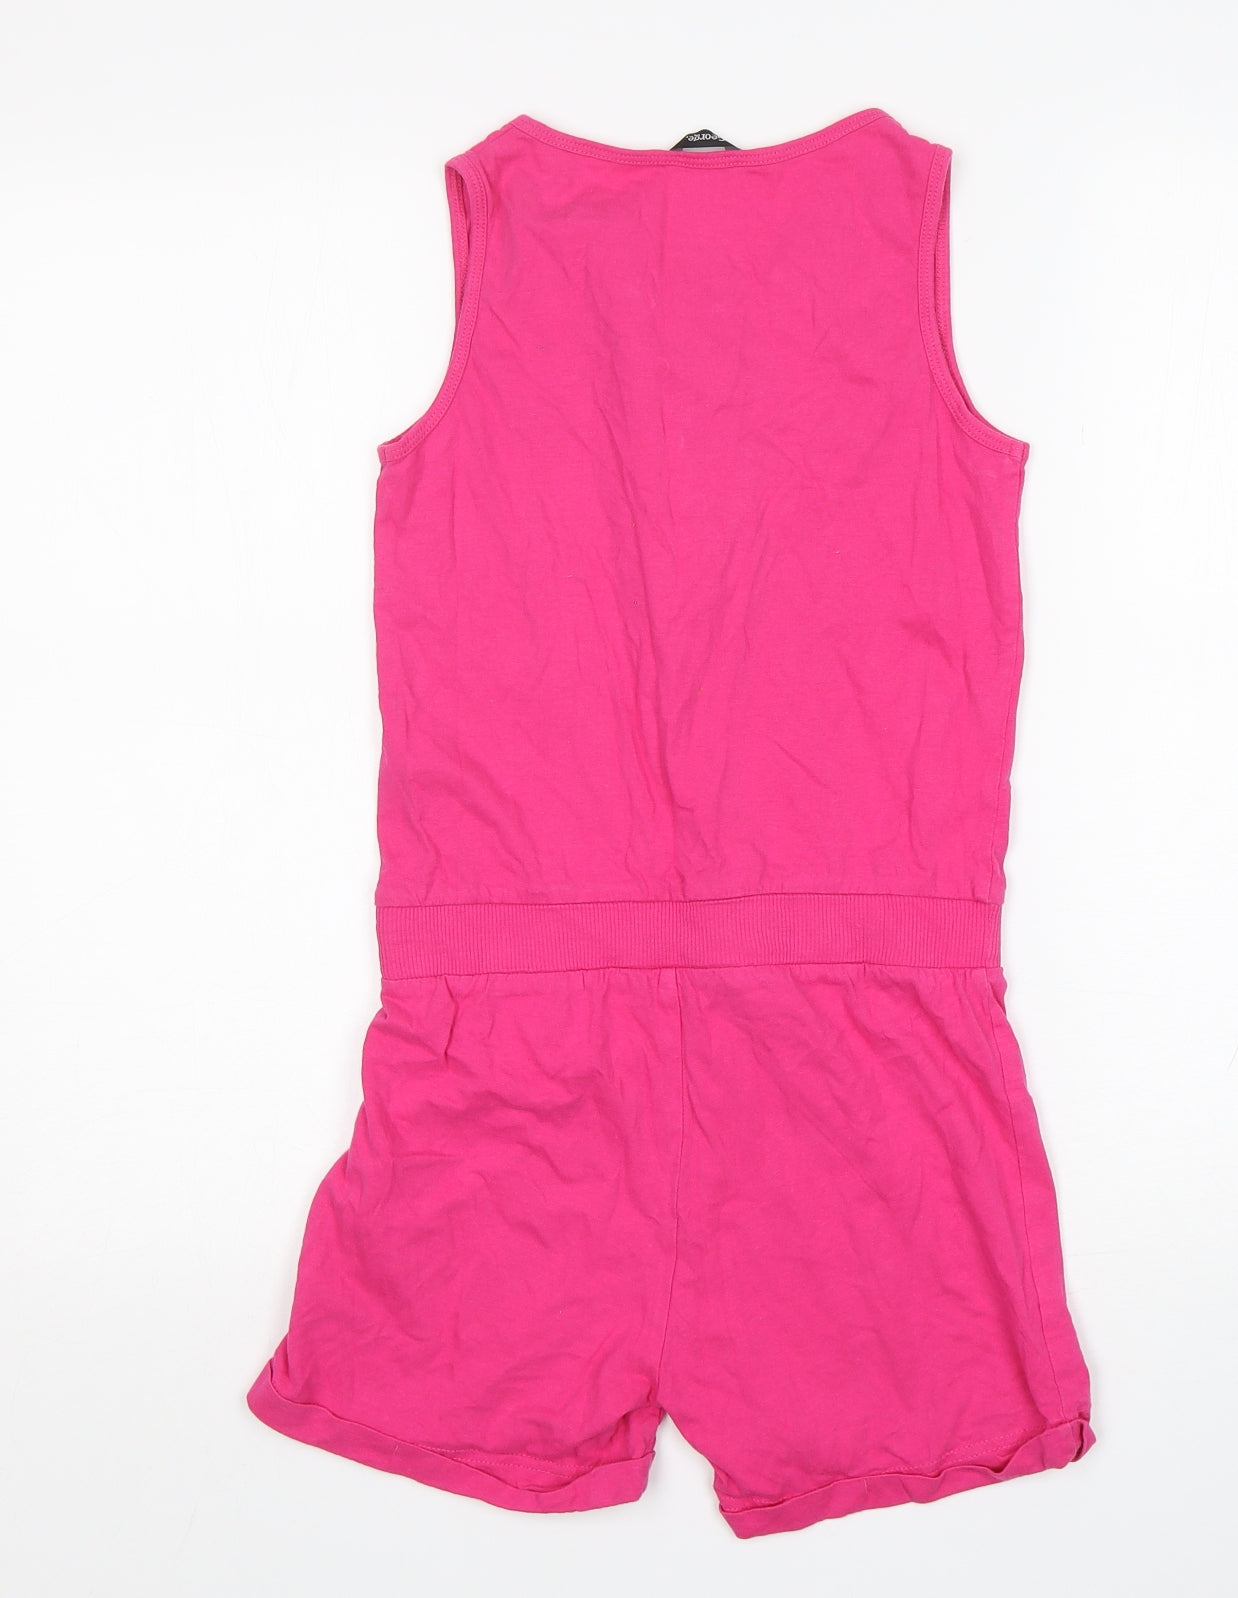 George Girls Pink  Cotton Romper One-Piece Size 11-12 Years